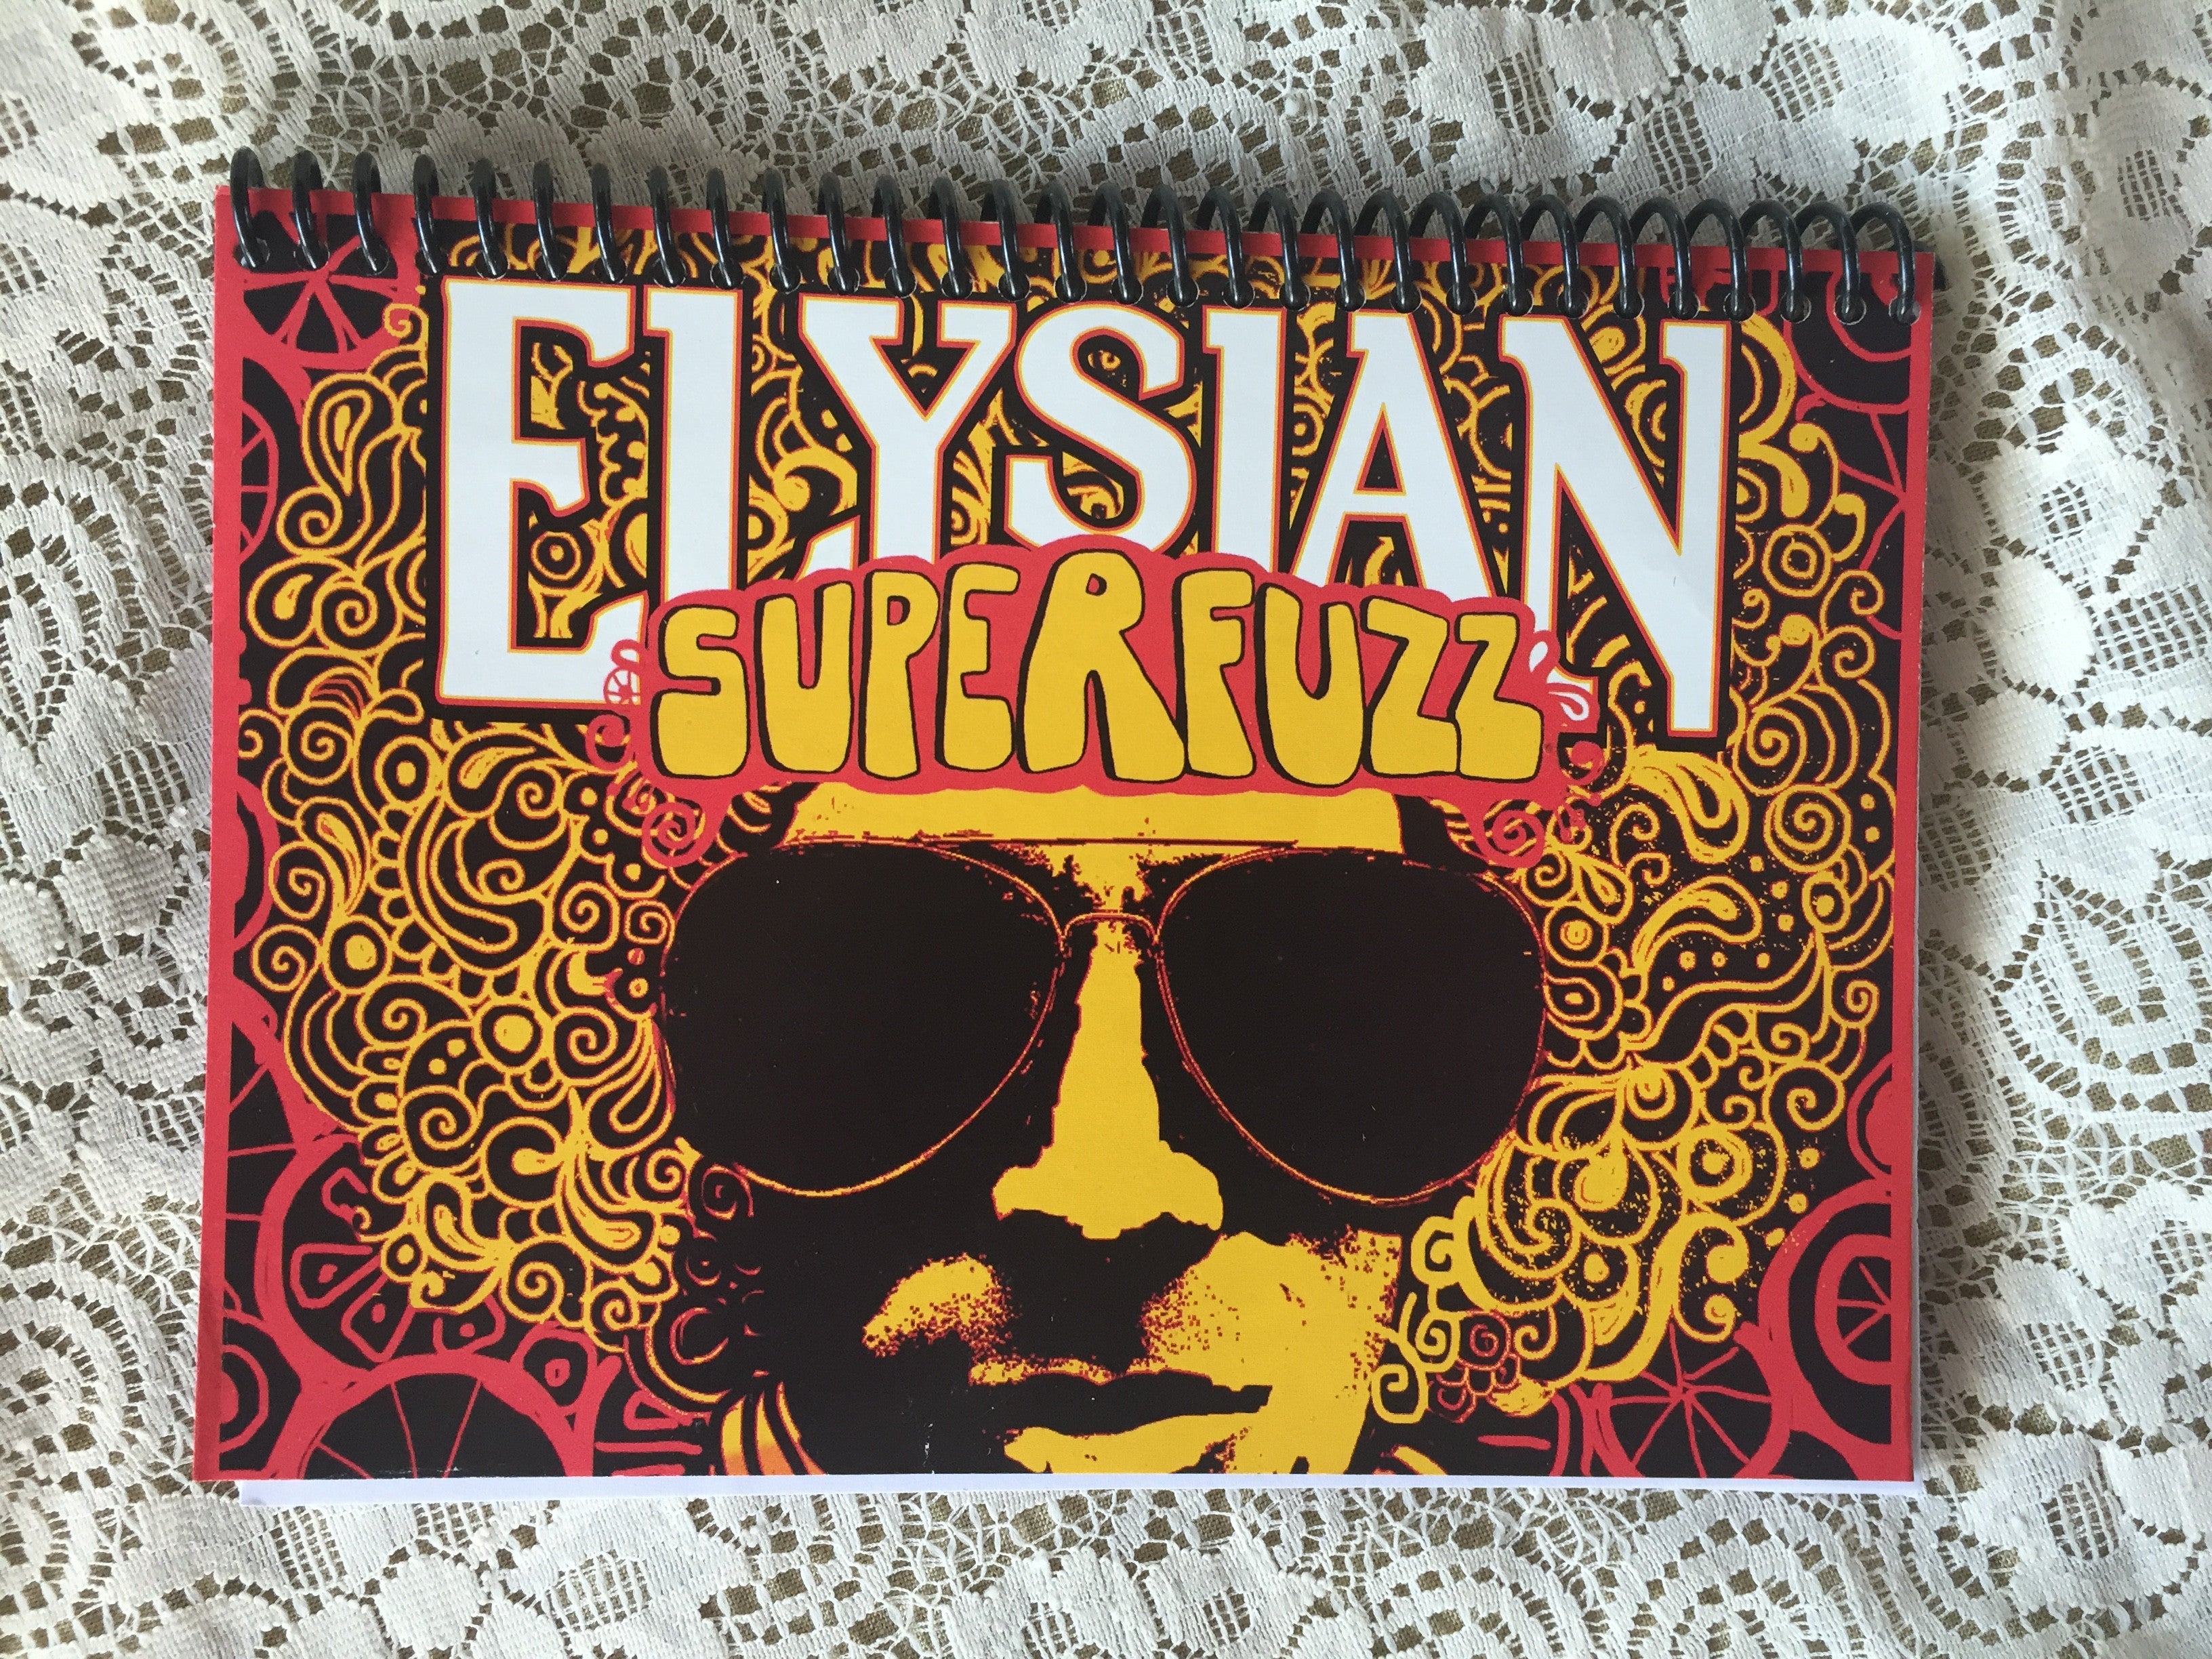 Elysian Superfuzz Recycled Beer Carton Notebook